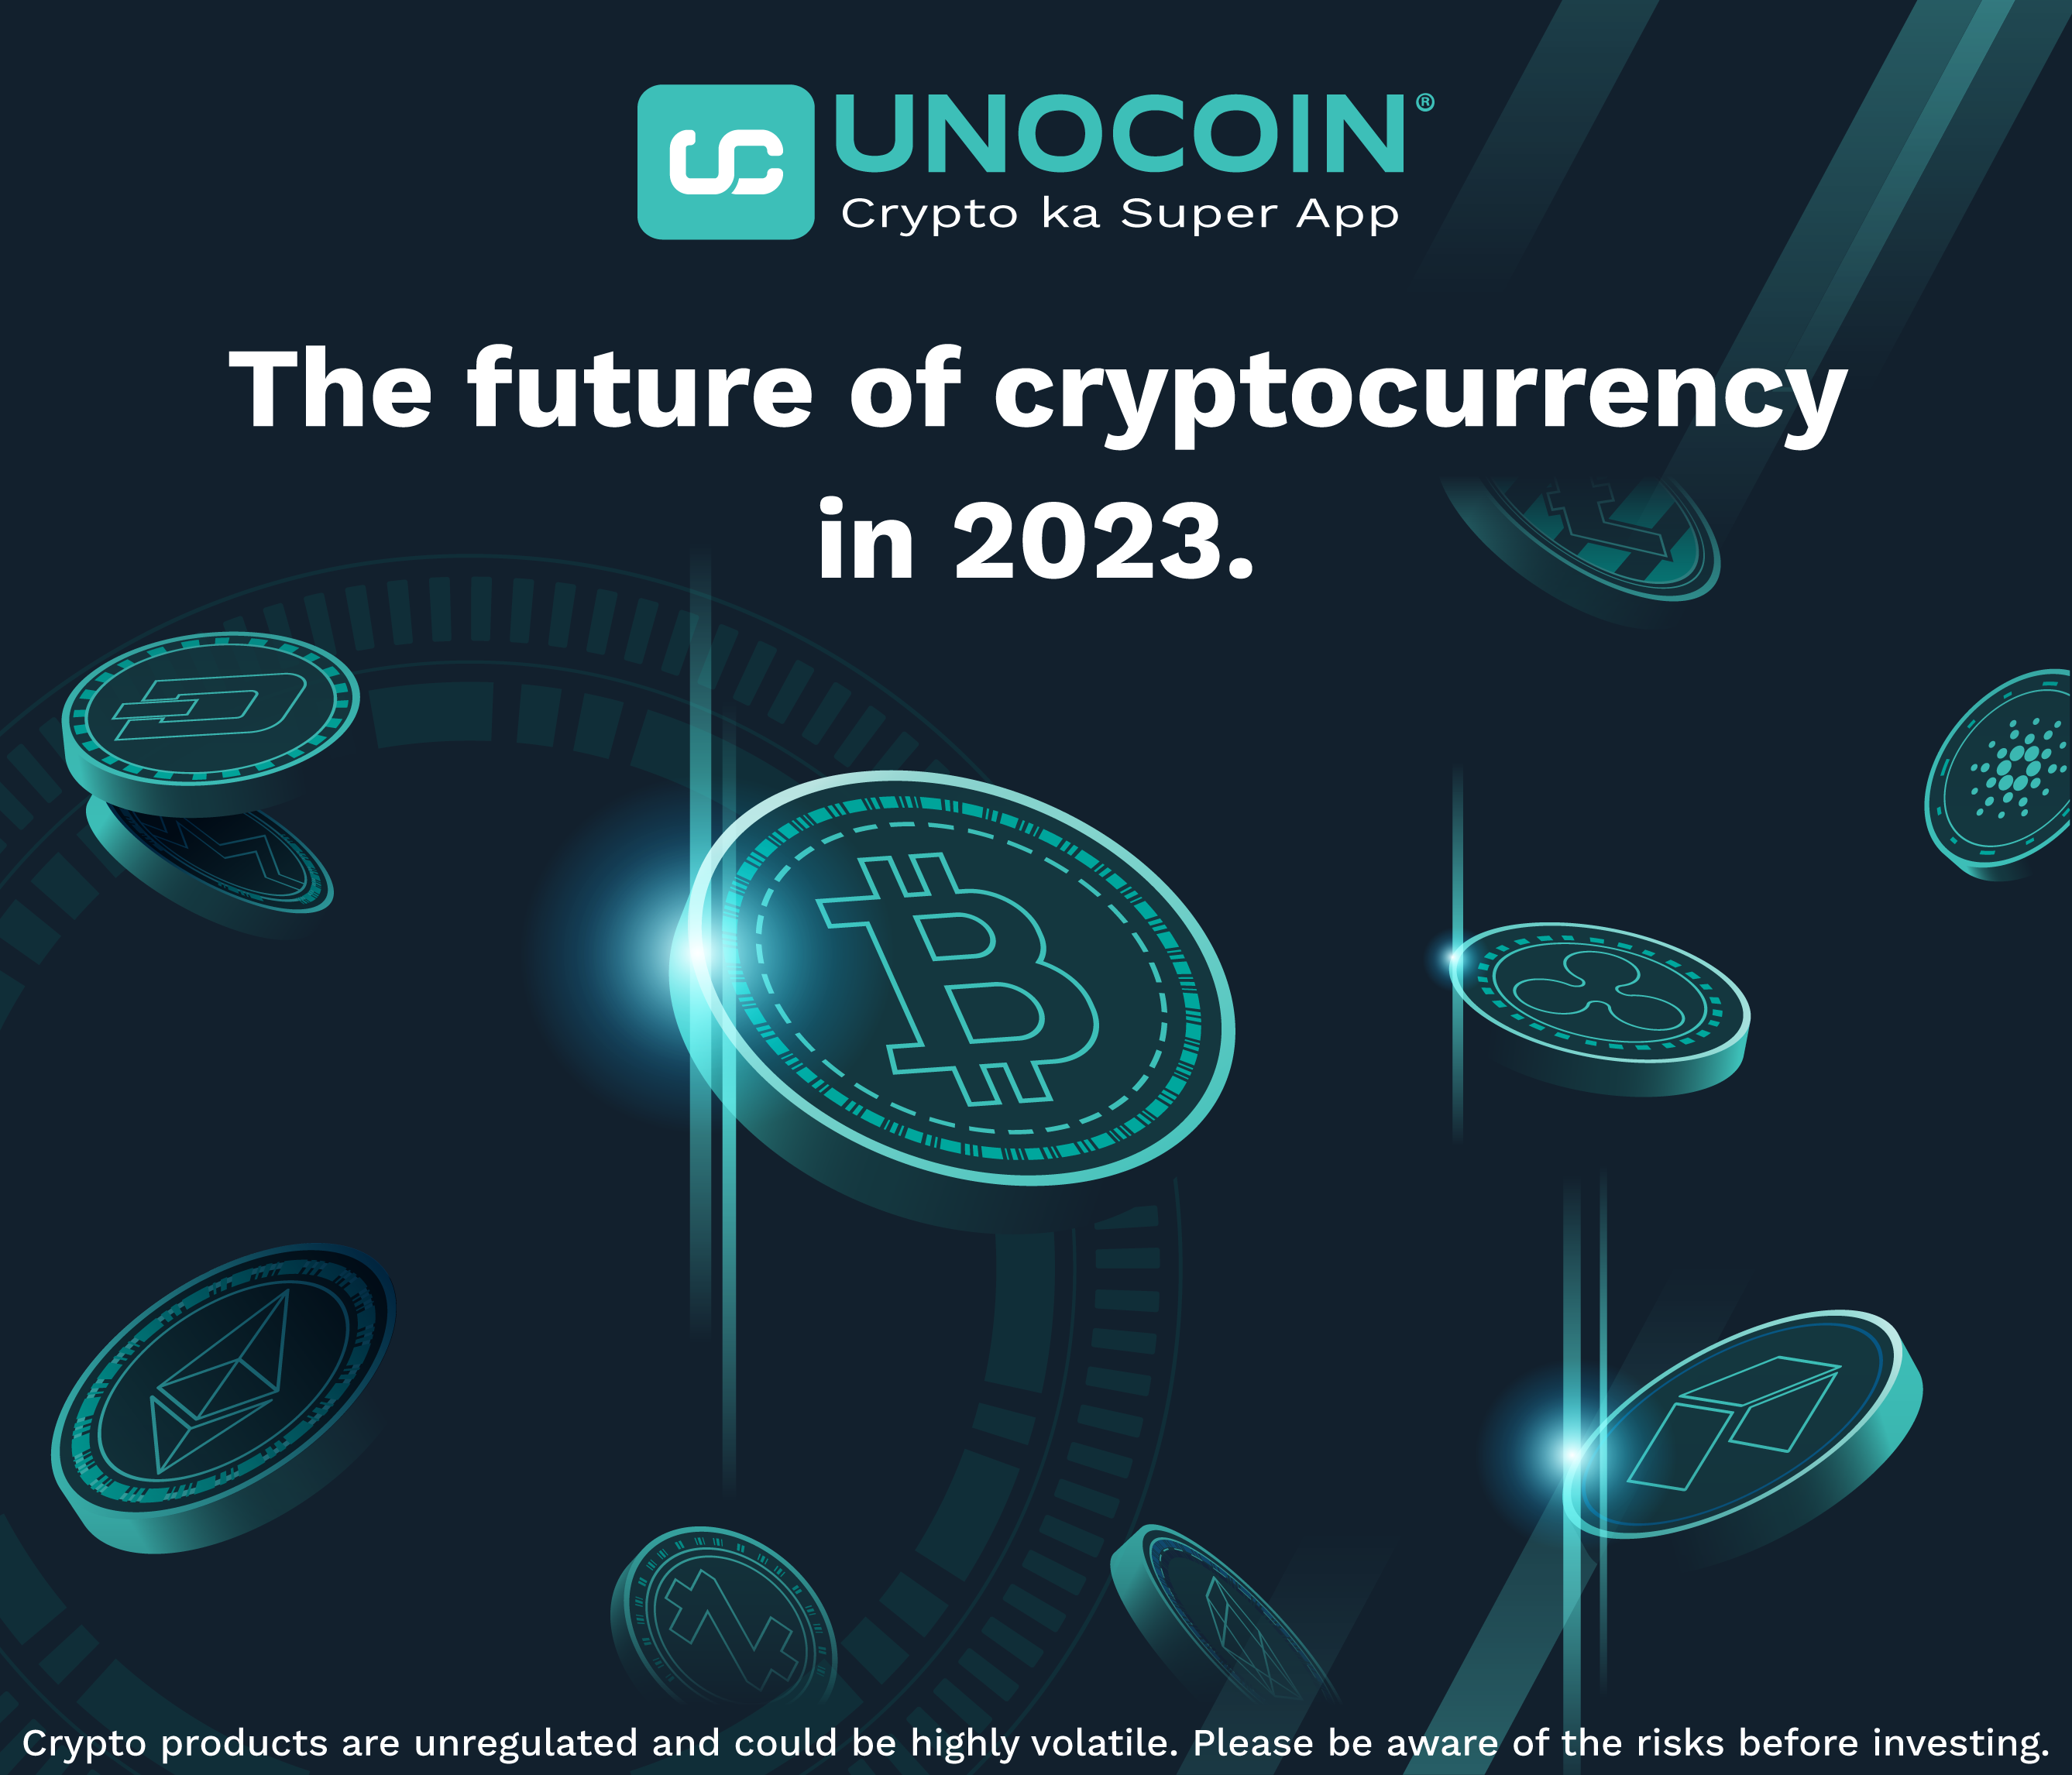 whats the future of crypto currency